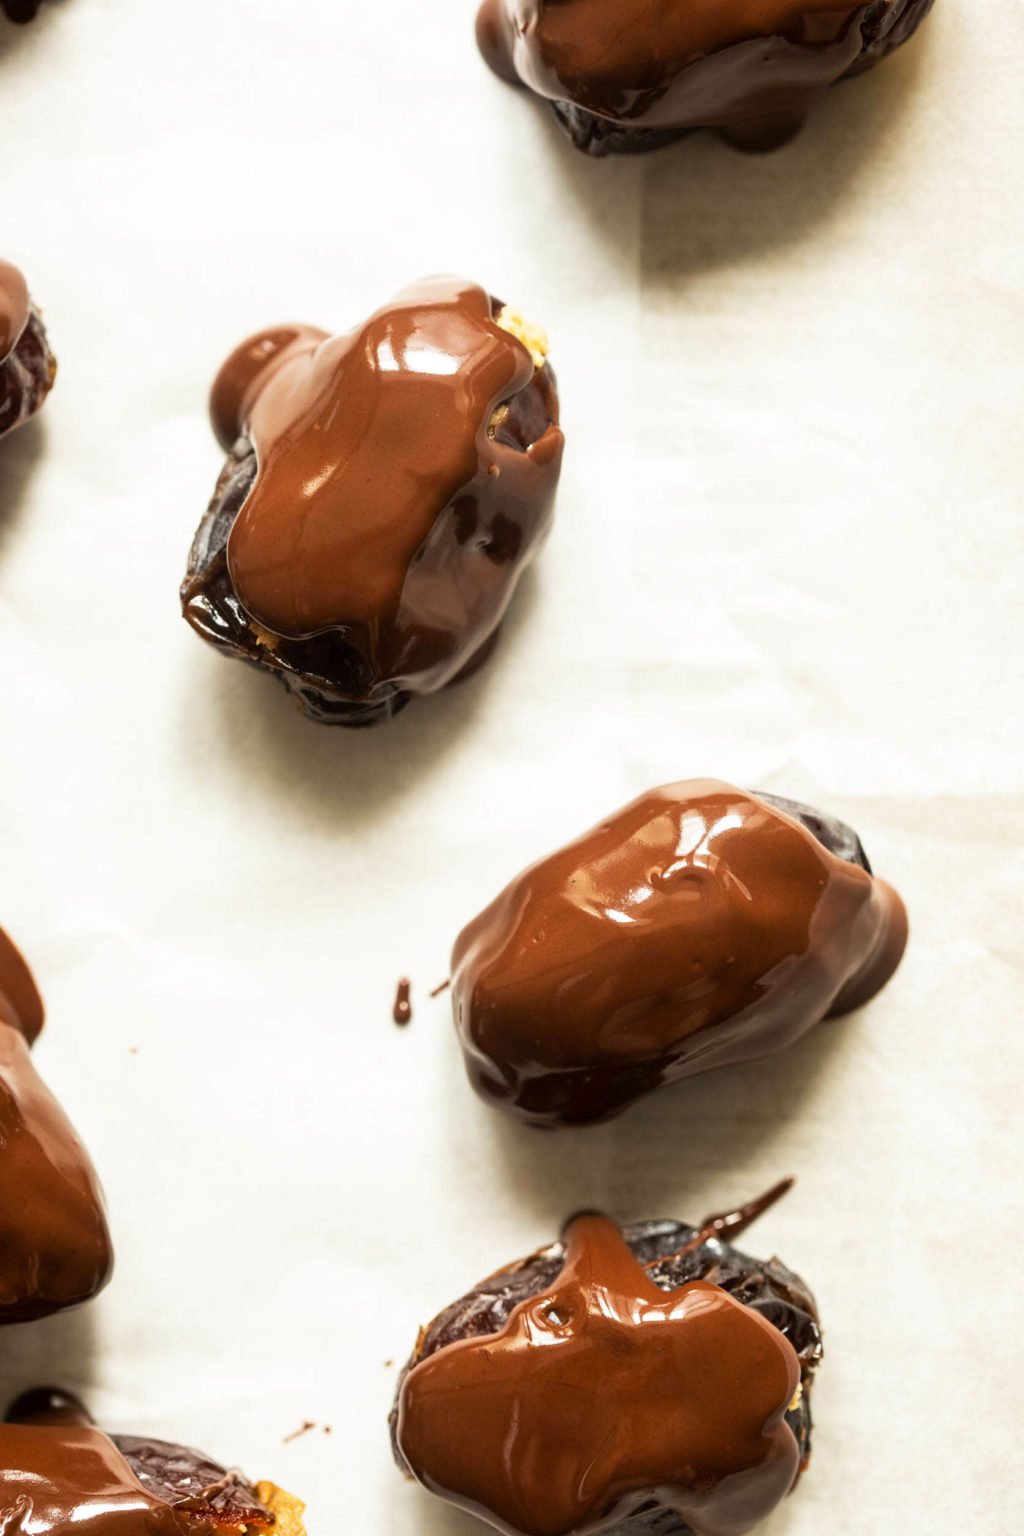 Medjool dates have been drizzled with dark chocolate on a parchment lined baking sheet.